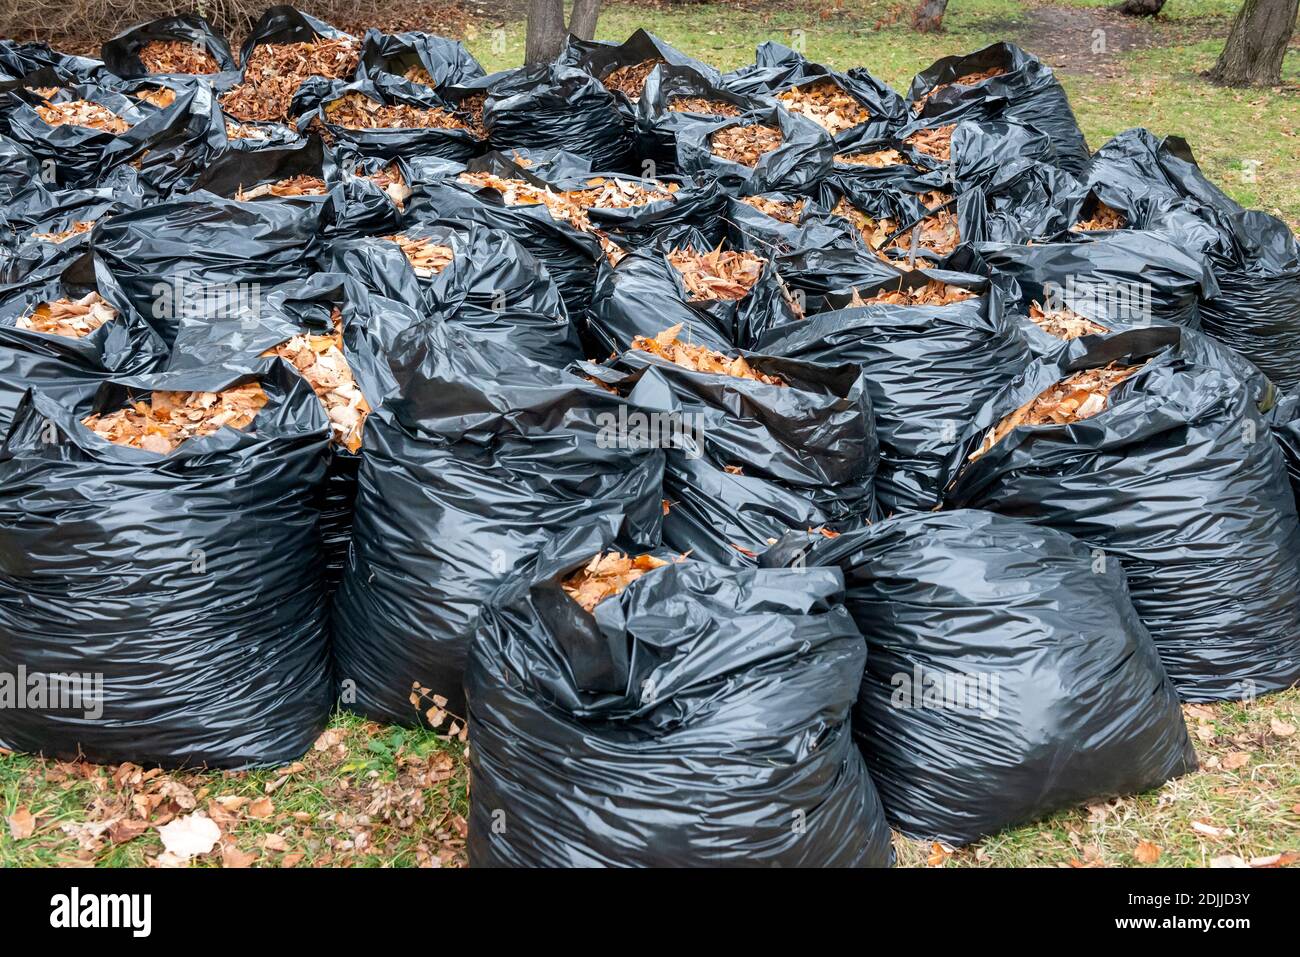 https://c8.alamy.com/comp/2DJJD3Y/bagged-leaves-black-plastic-bags-full-of-dried-leaves-ready-for-collection-in-sofia-bulgaria-eastern-europe-2DJJD3Y.jpg